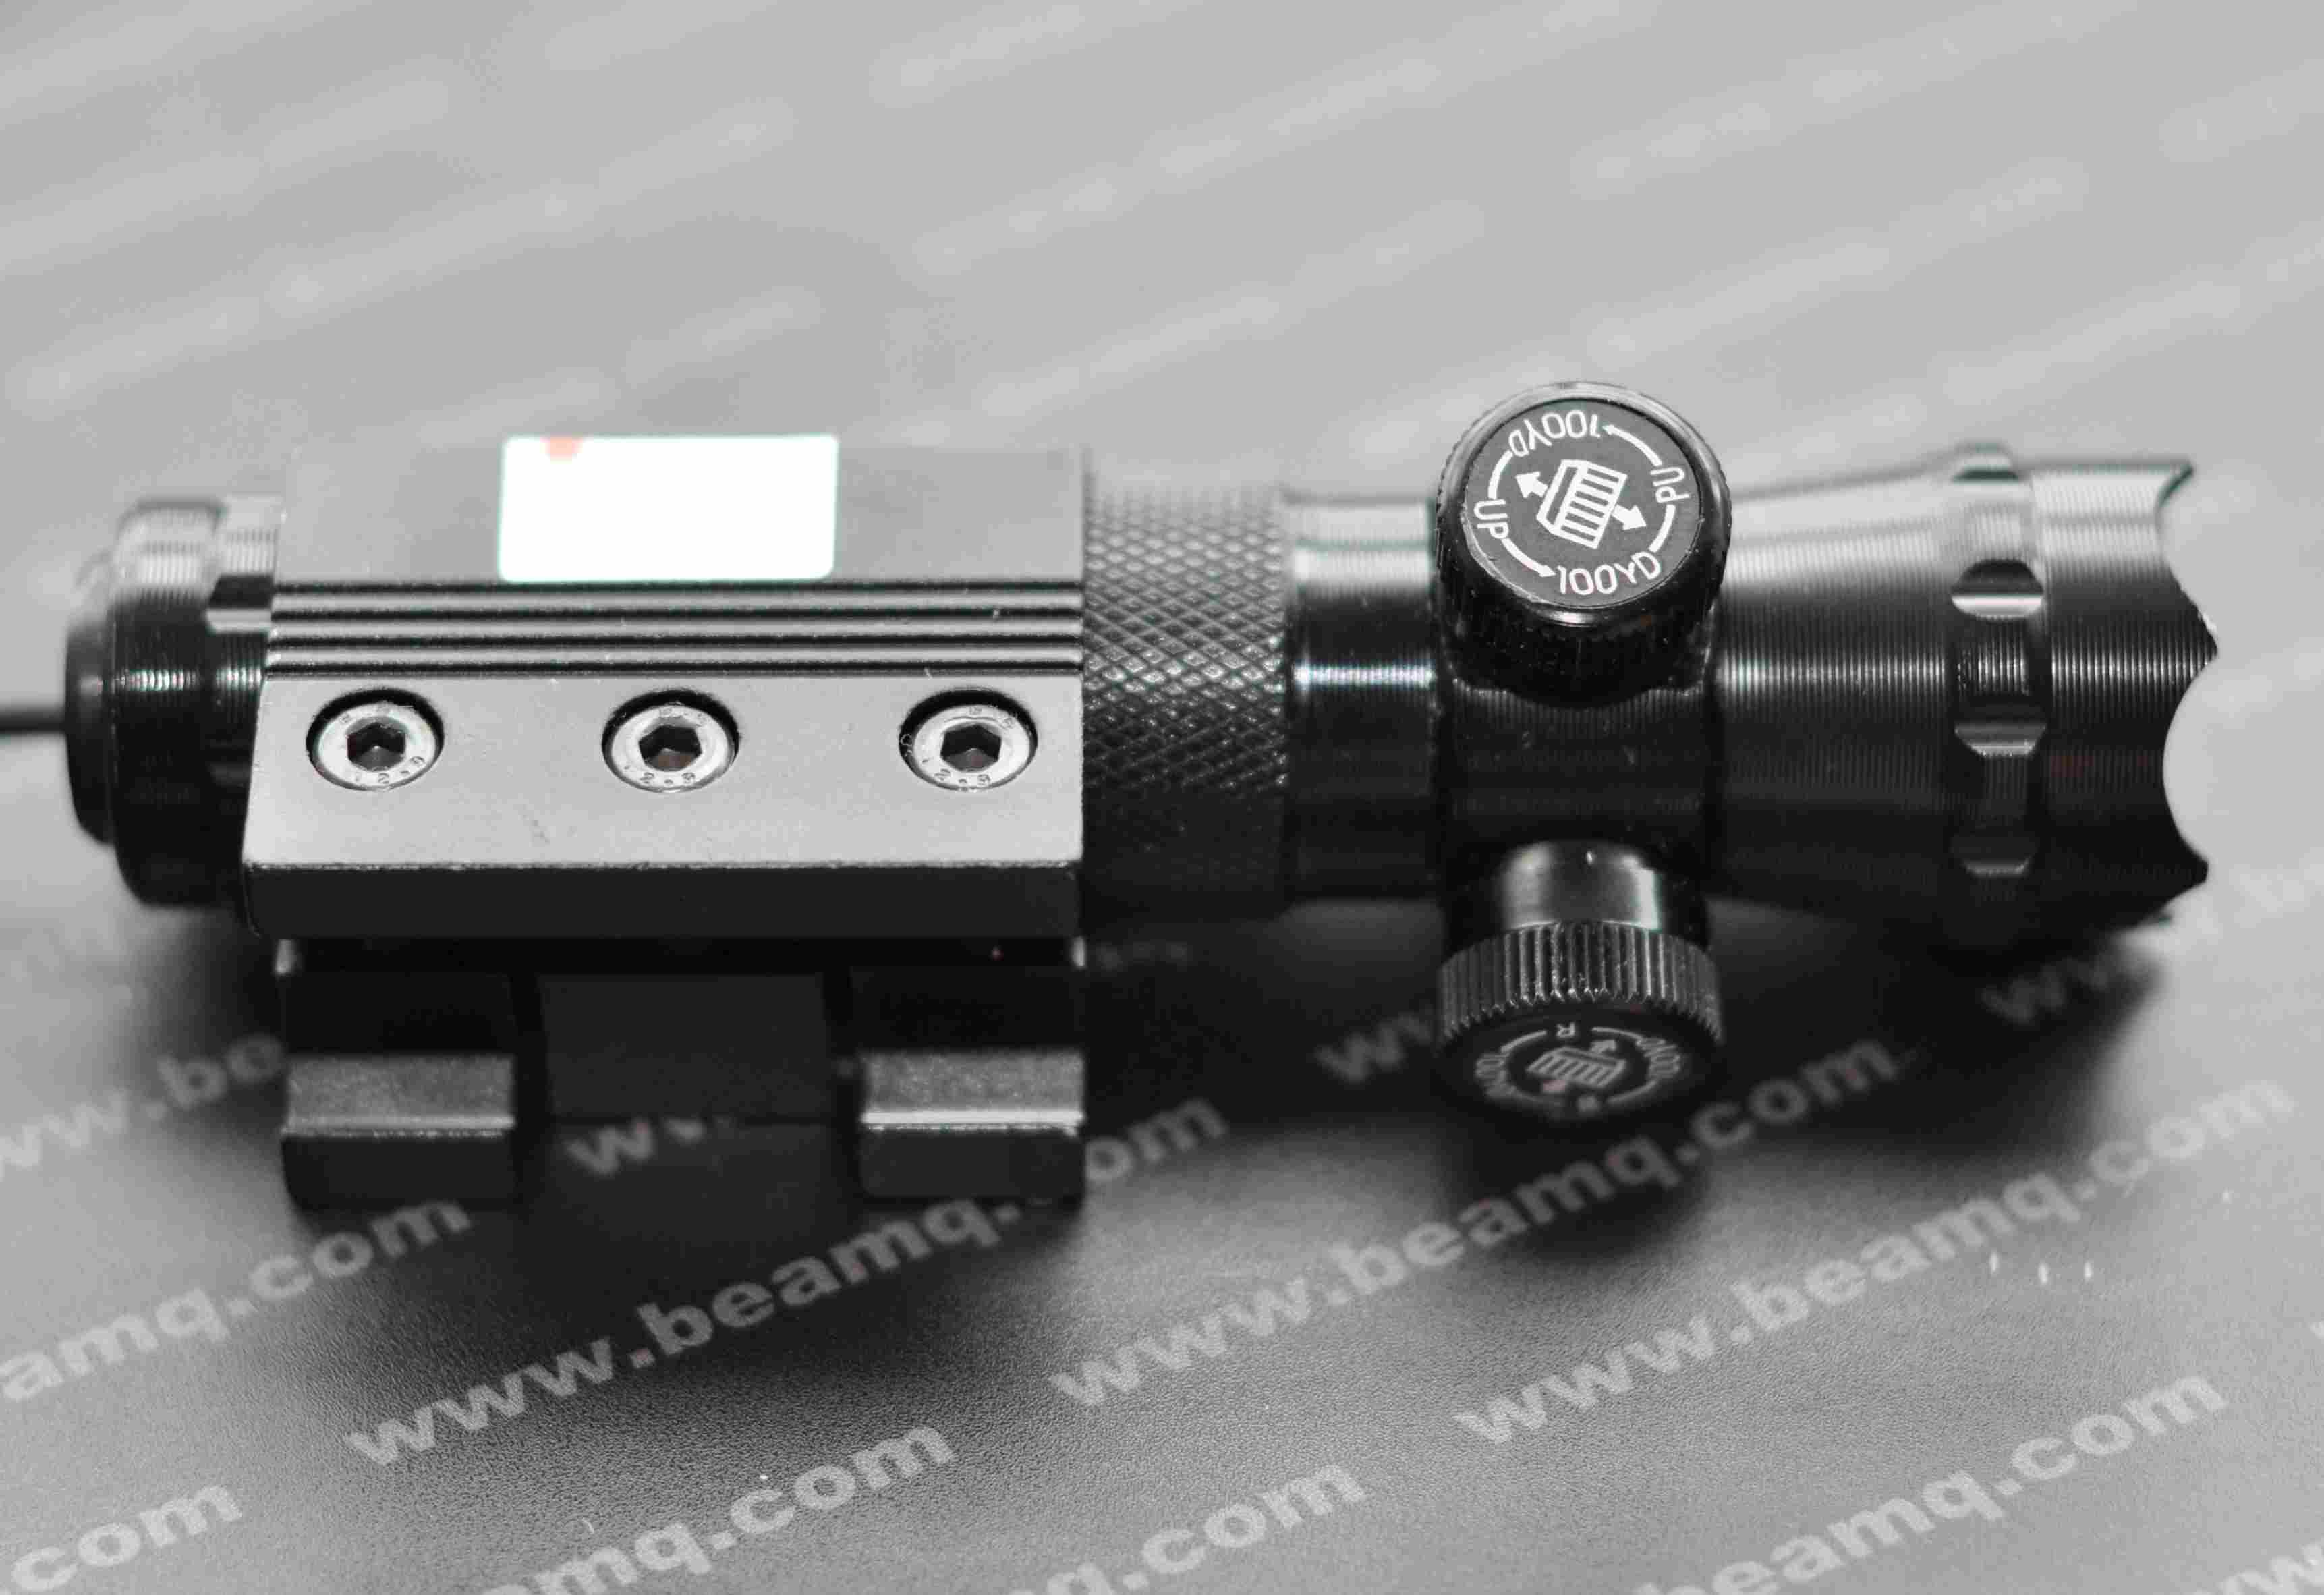 Green Laser Rifle Sight Gun Sight with 50mW Output Power 1 Mile